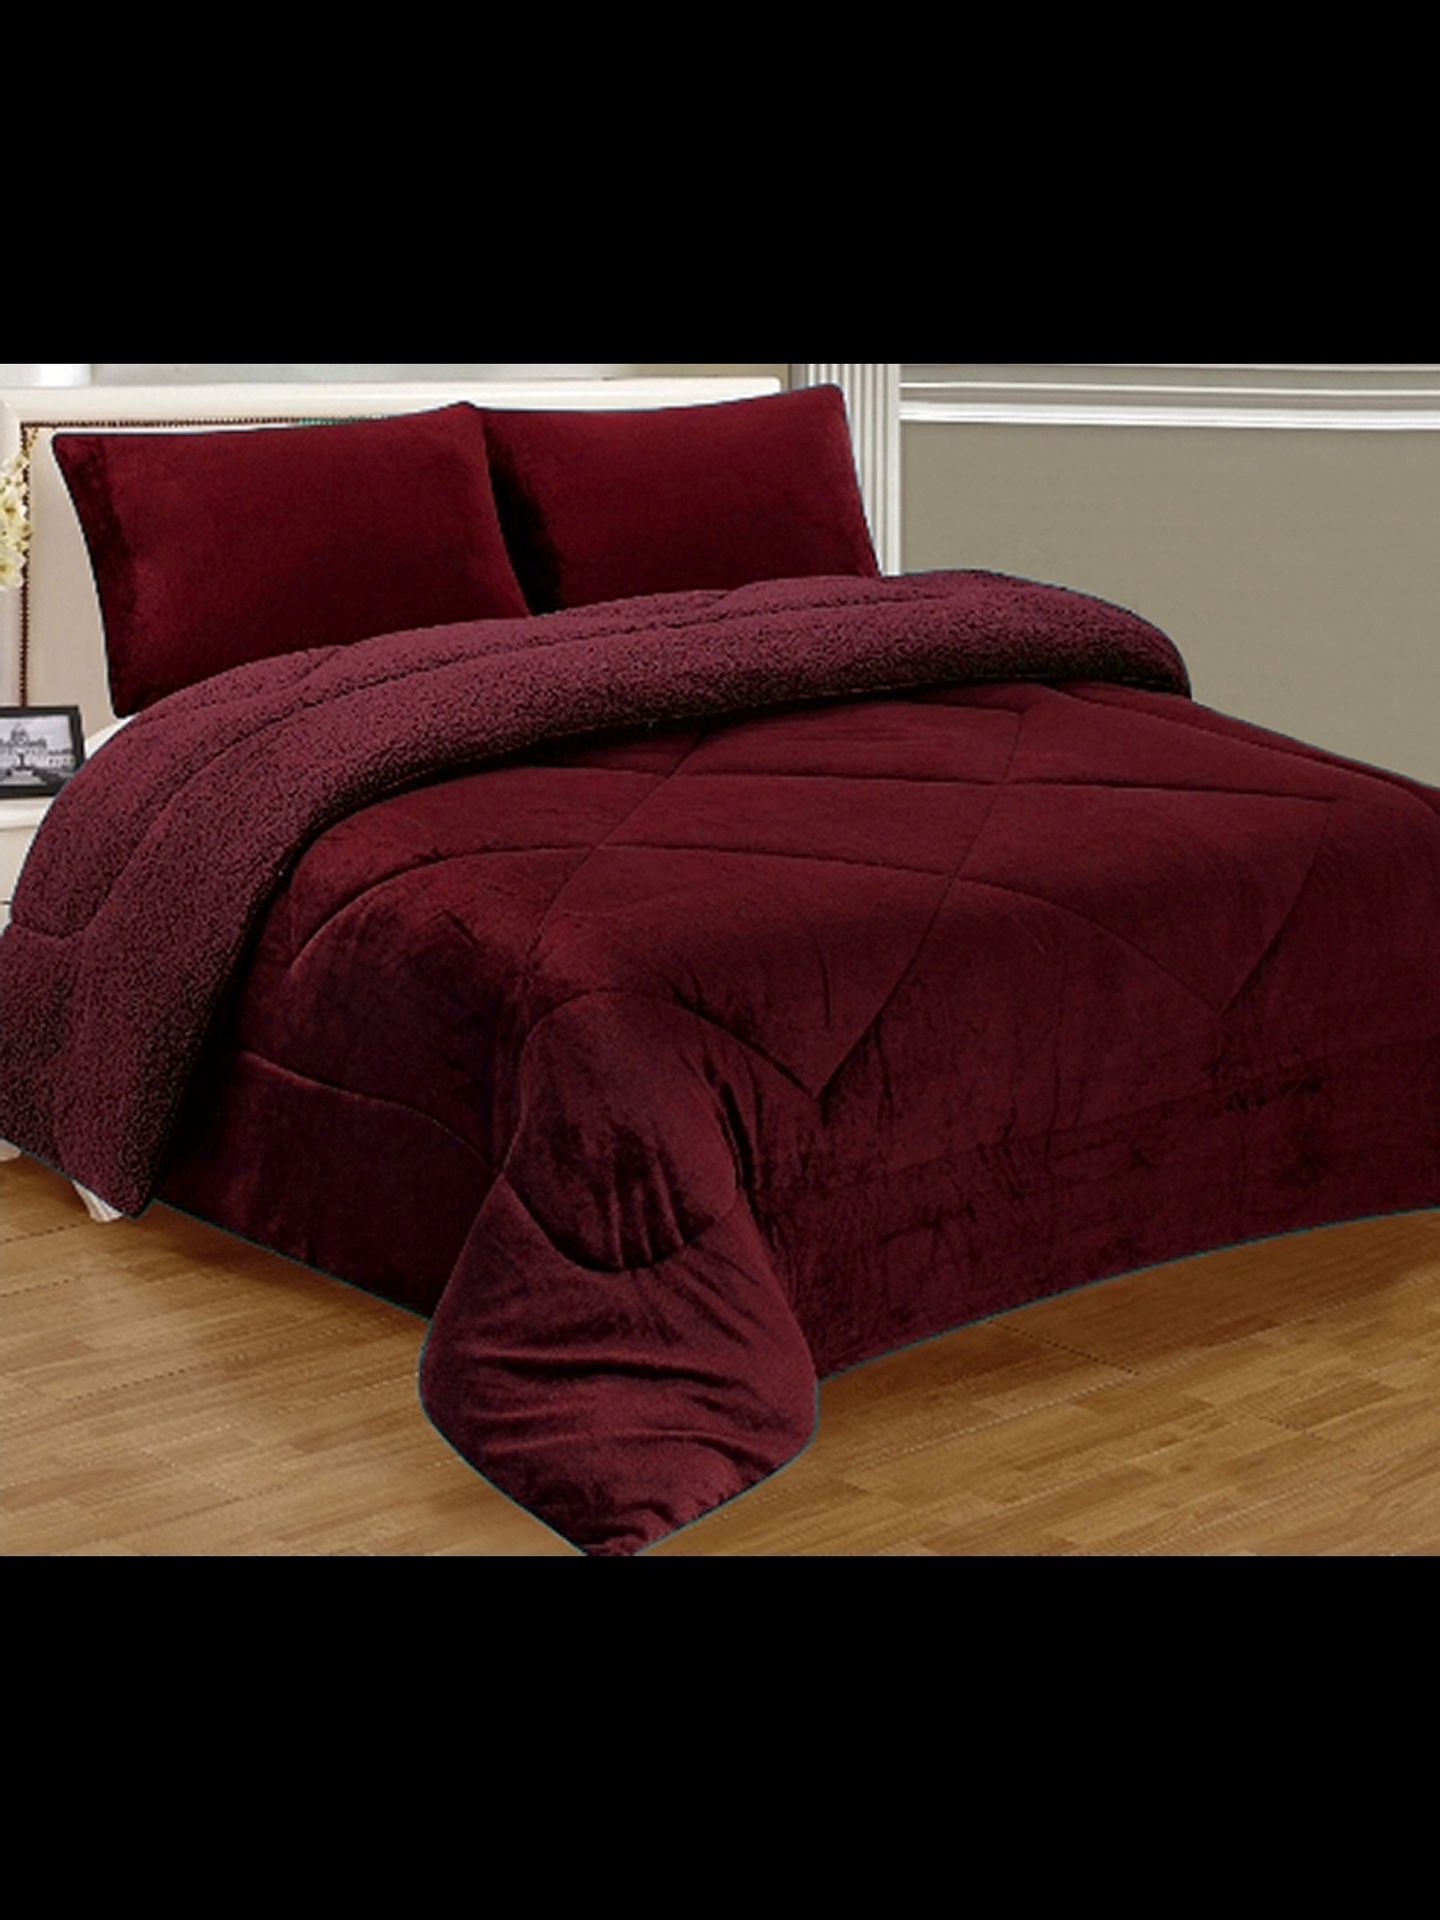 Brand New Burgundy Warm Super Thick Soft Borrego Sherpa Quilted Blanket 3 Piece Set with Pillow Shams Queen Size